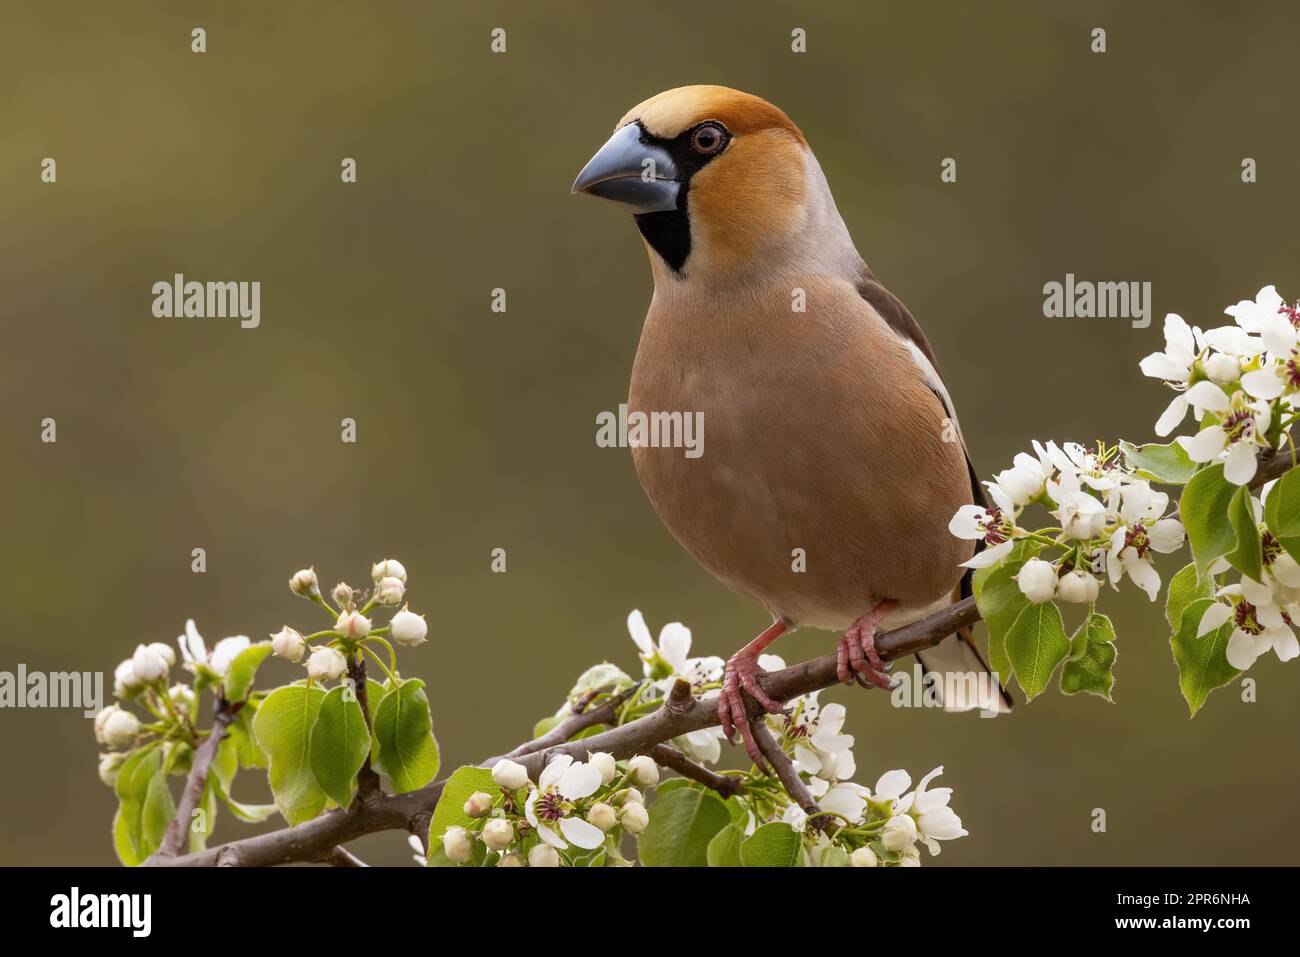 Hawfinch sitting on branch with wildflowers in spring Stock Photo